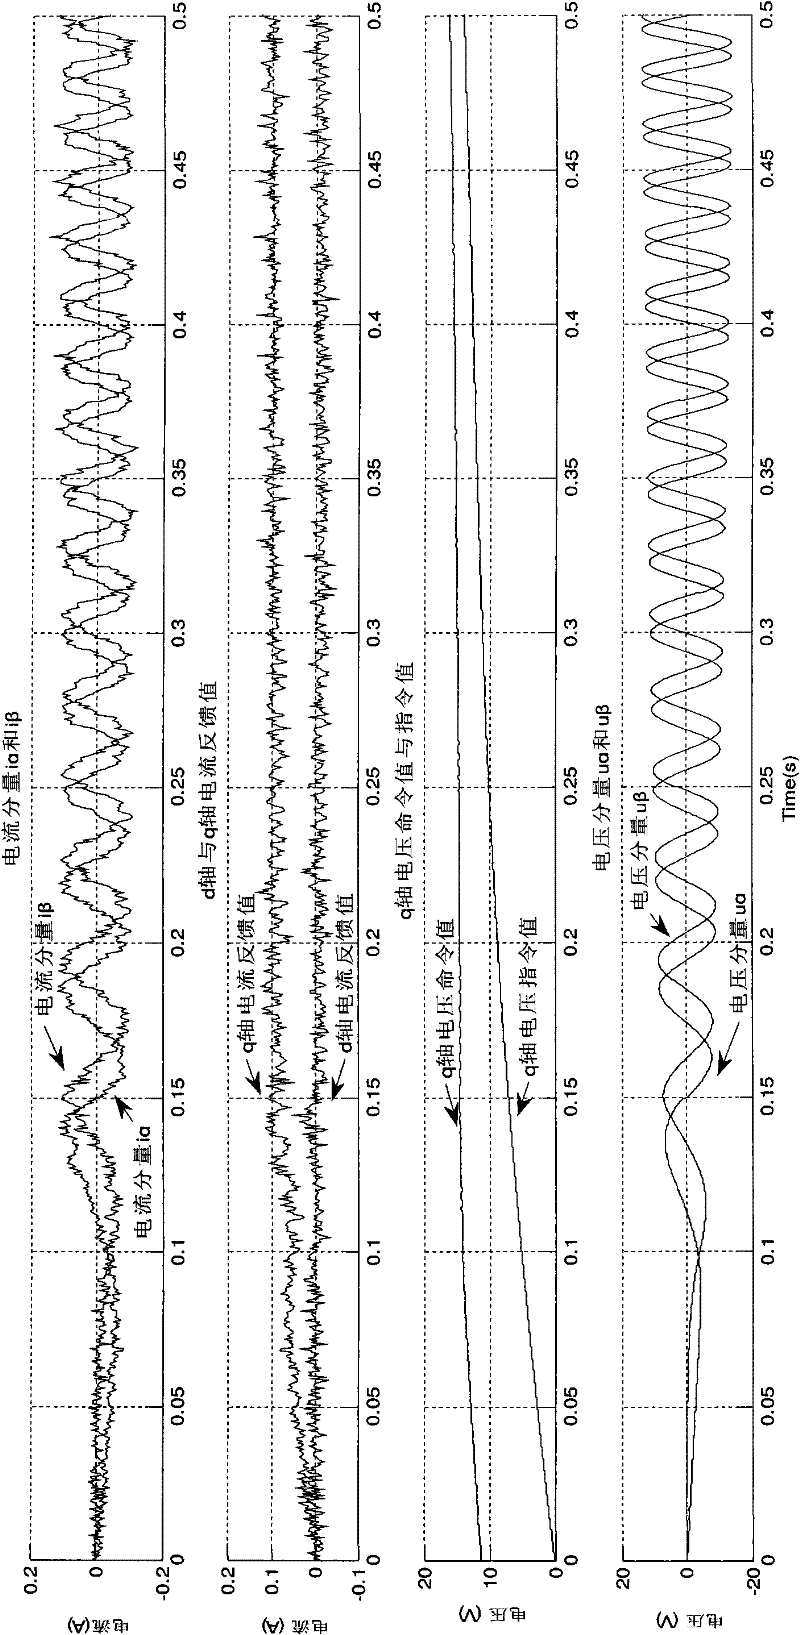 Timing control system and method for non-salient pole permanent magnet synchronous motor